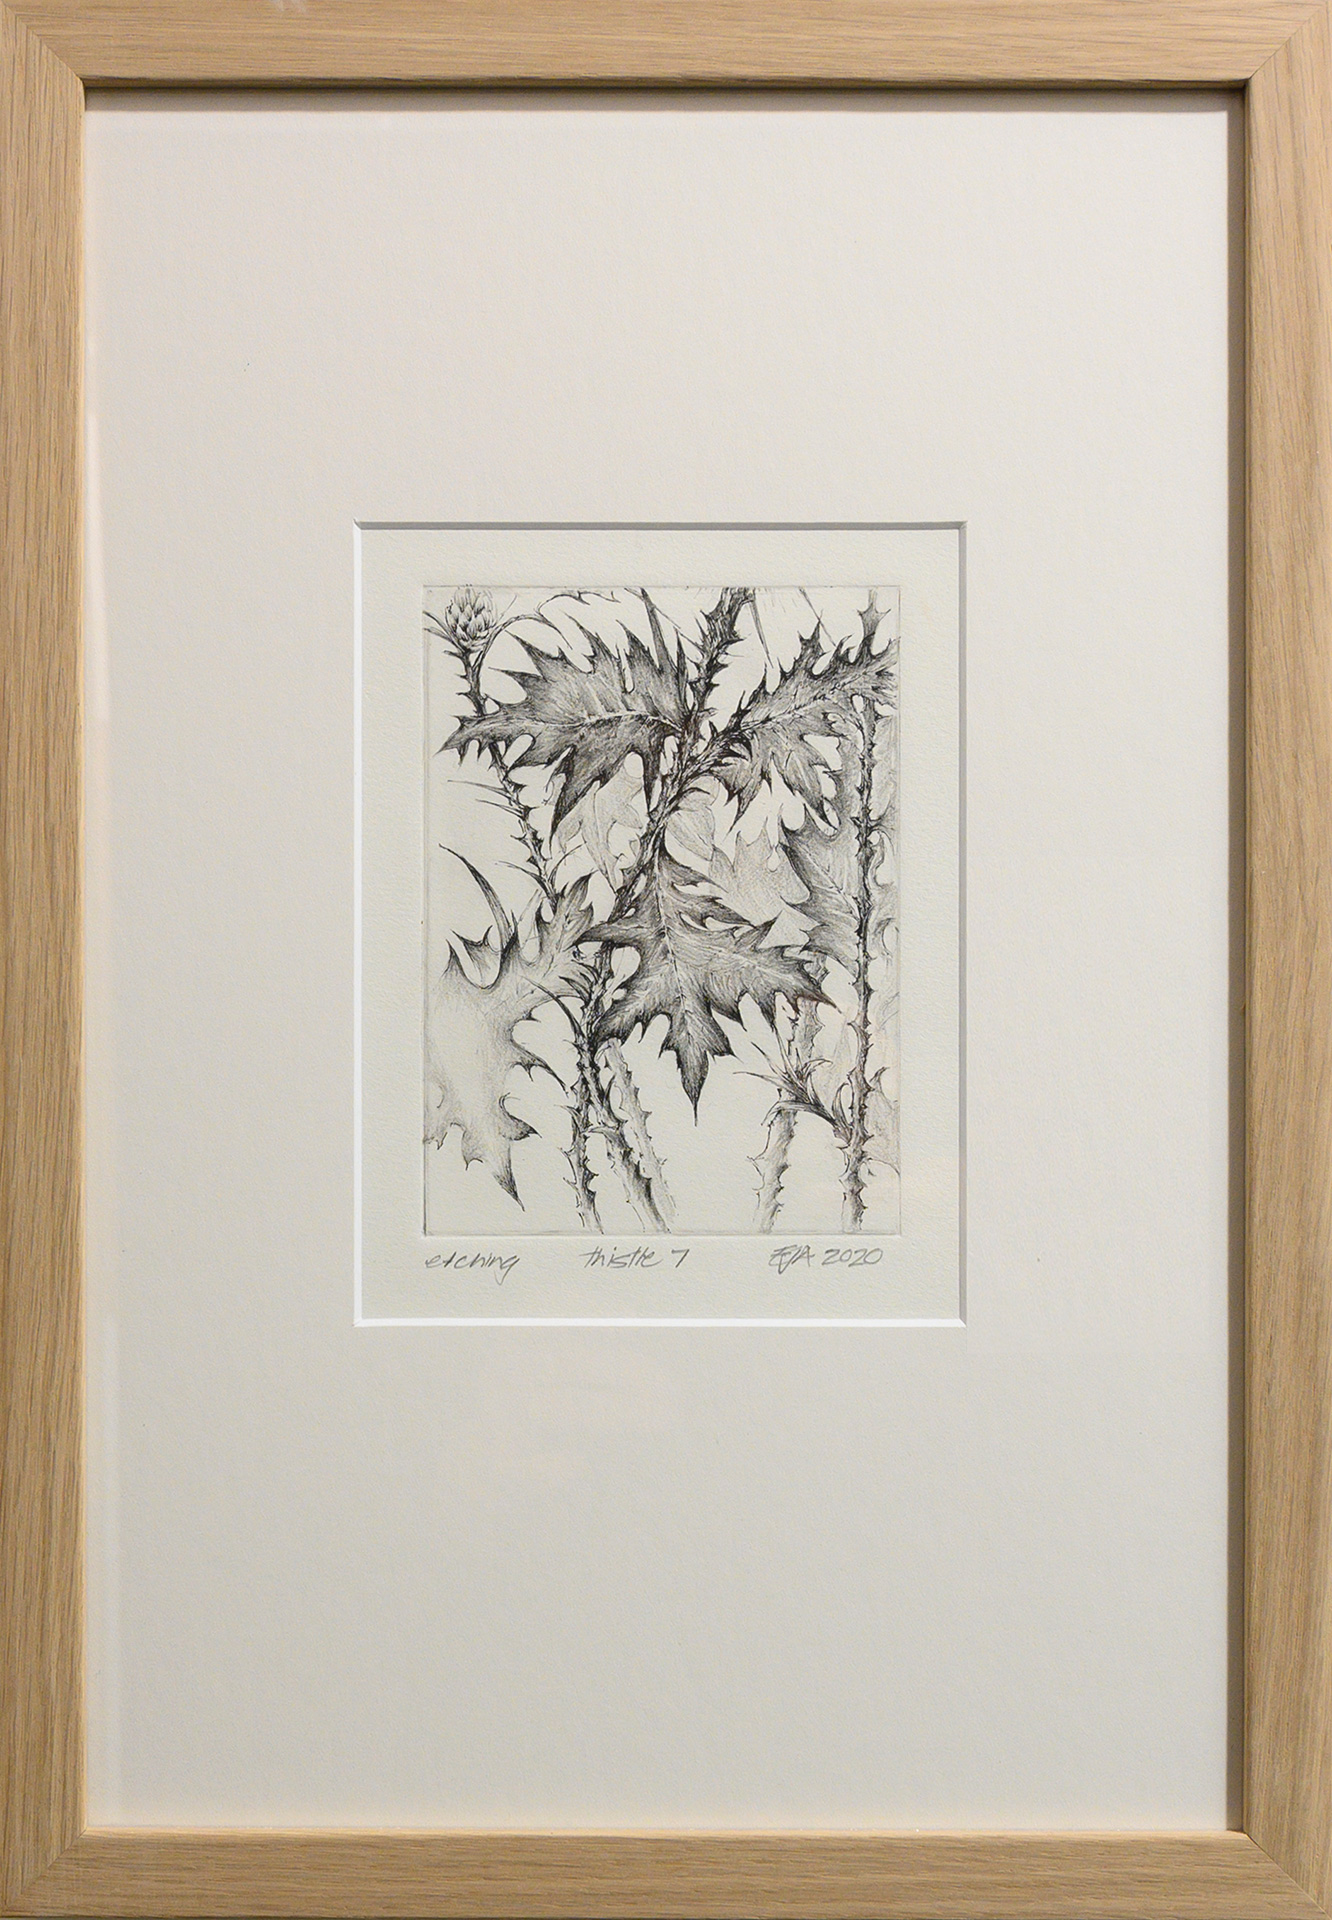 Framed artwork by Libby Altschwager of a b&w image of Scotch Thistle leaves